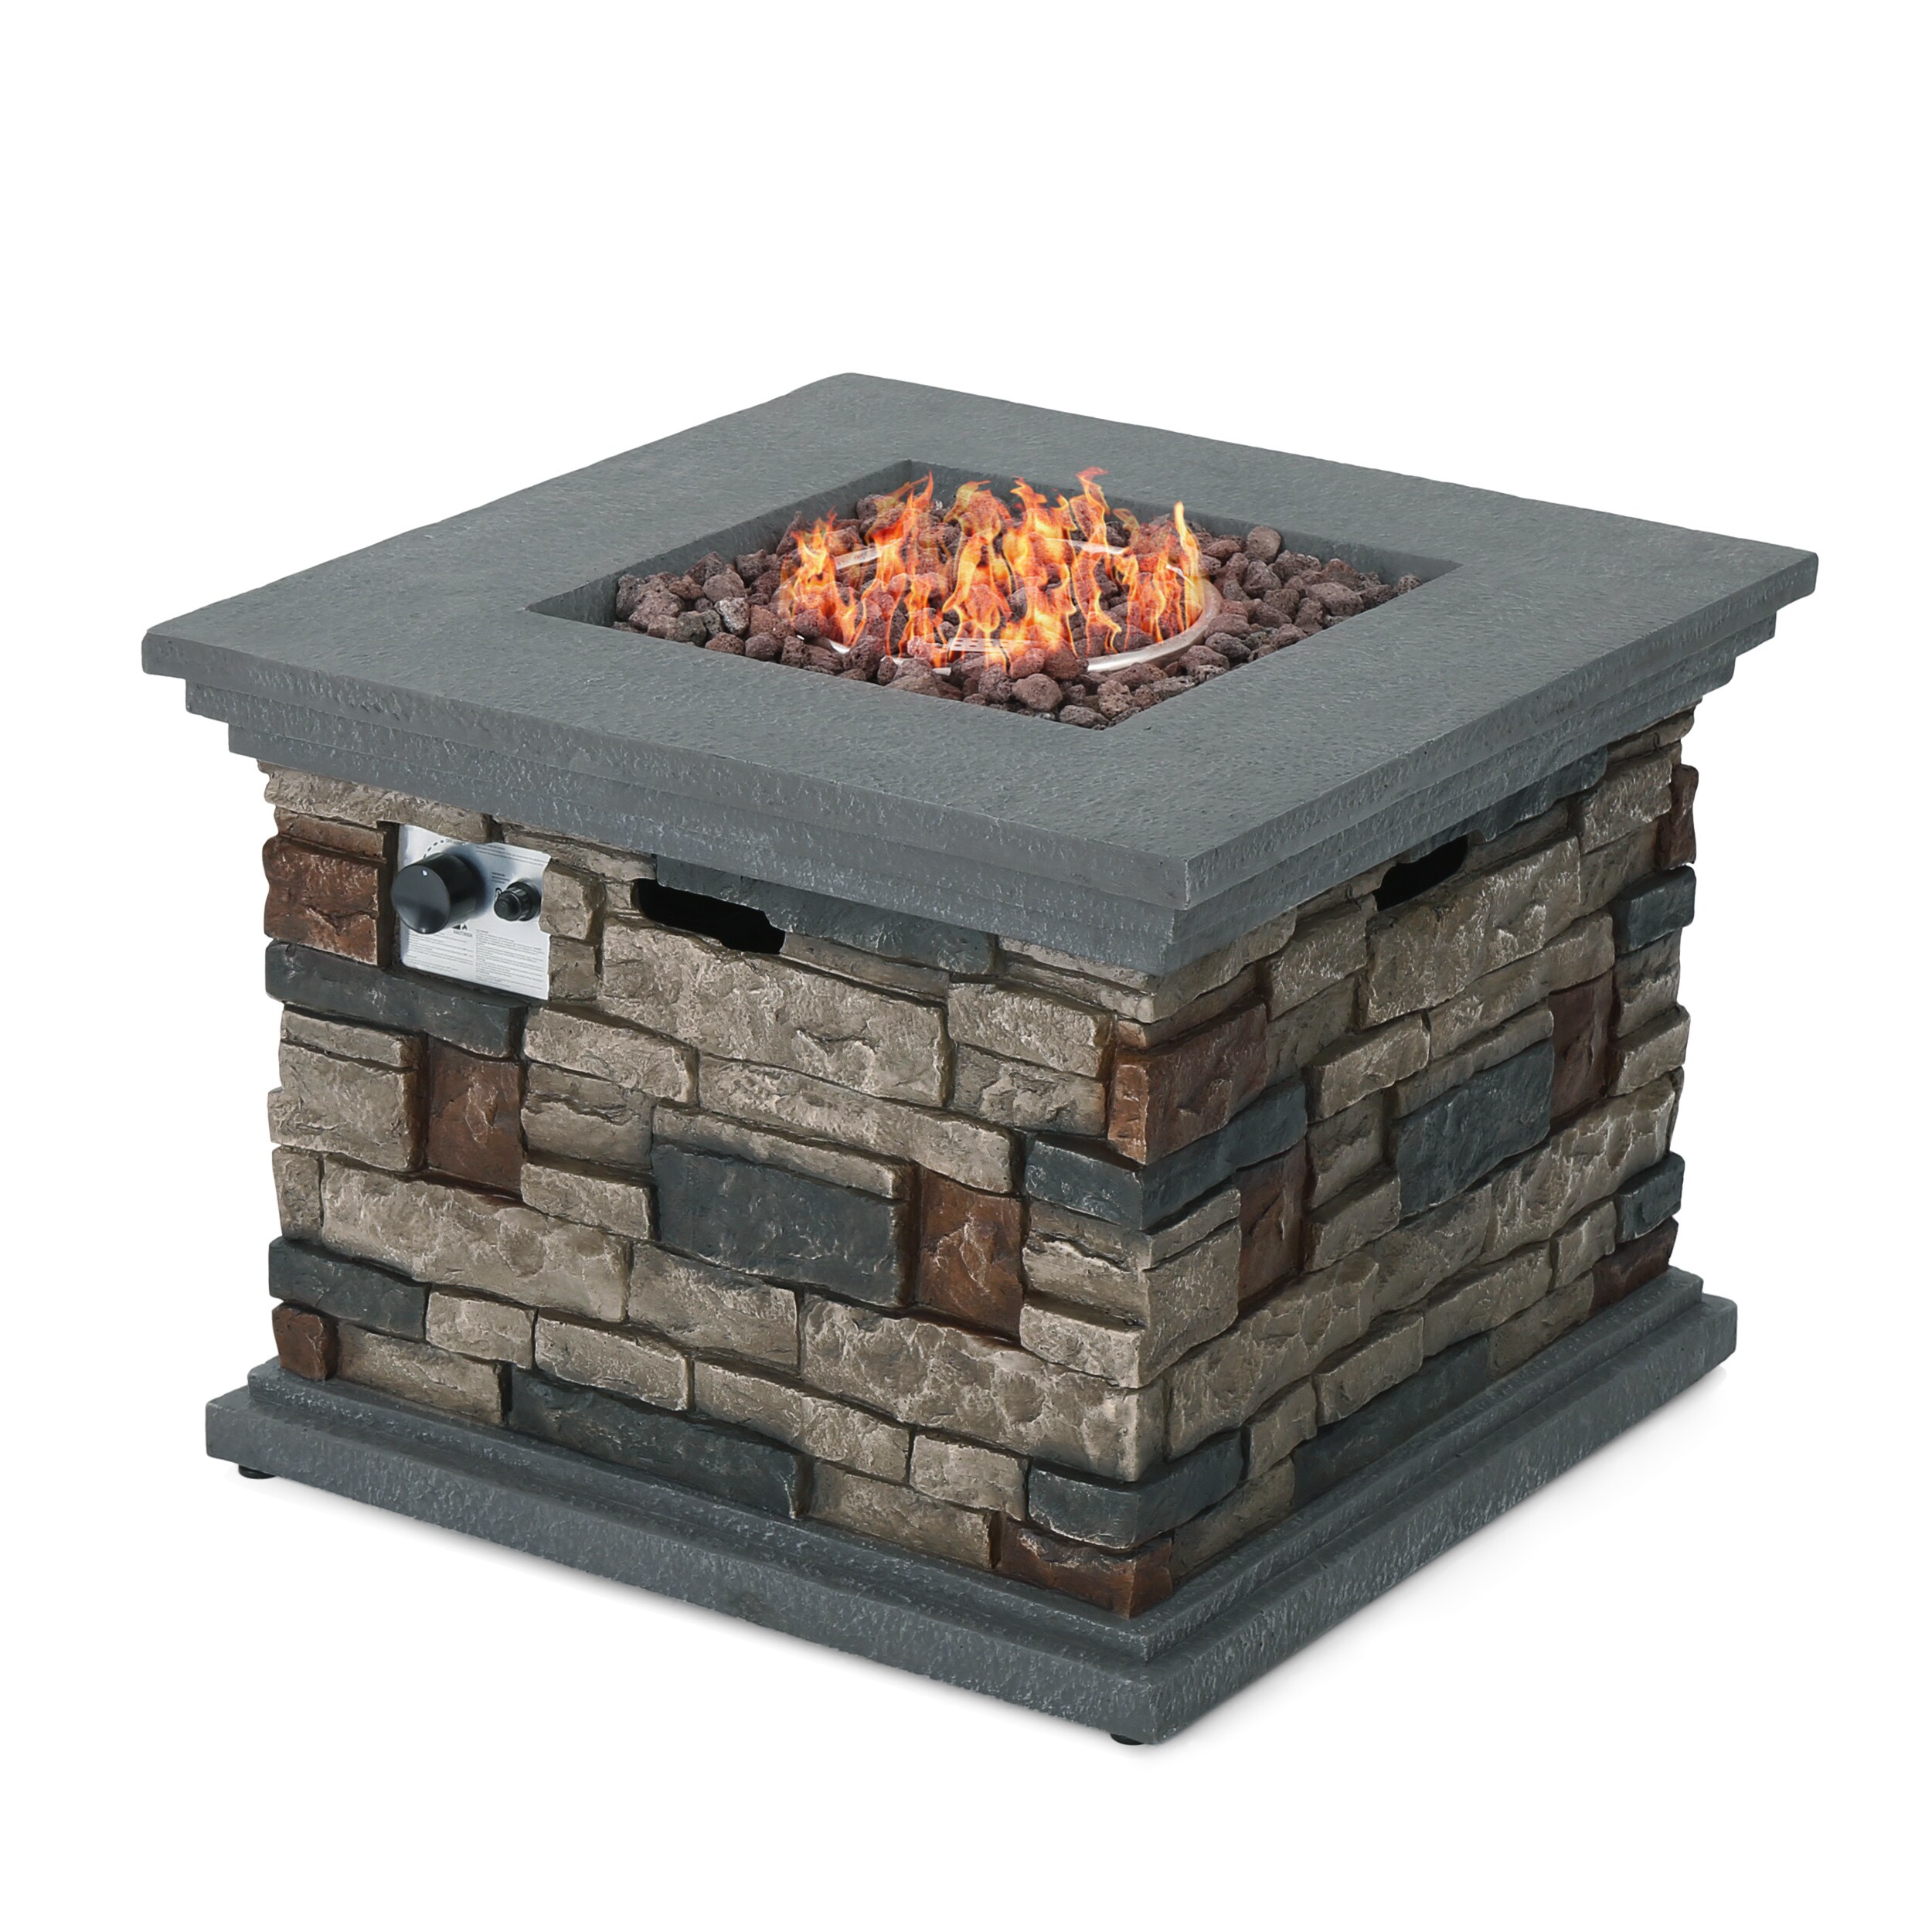 Outdoor Gas Fireplaces, Best Square Fire Pit